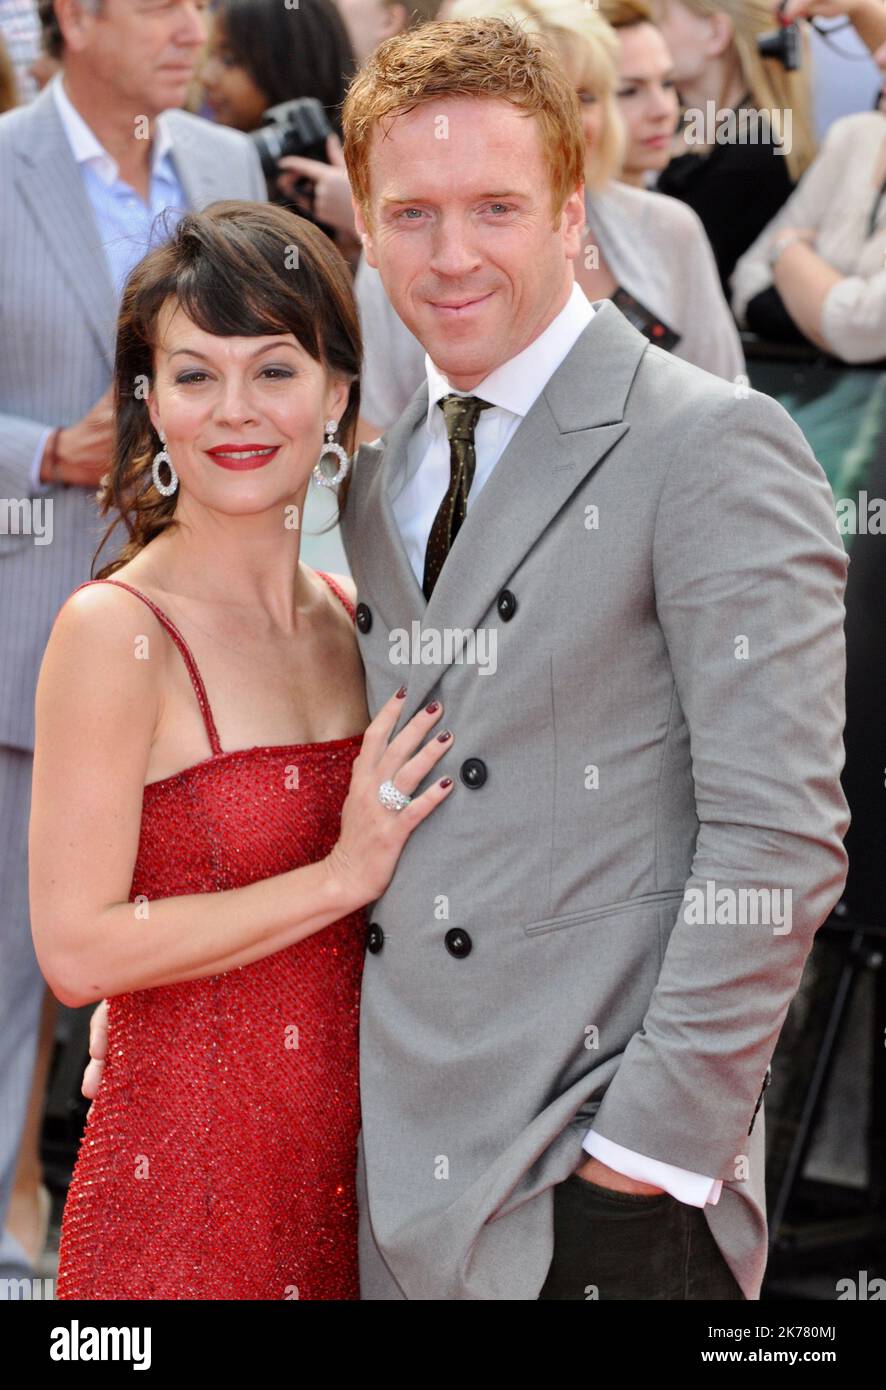 Helen McCrory, Damien Lewis. Harry Potter and the Deathly Hallows Part 2, World Premiere, Trafalgar Square, London. UK Stock Photo